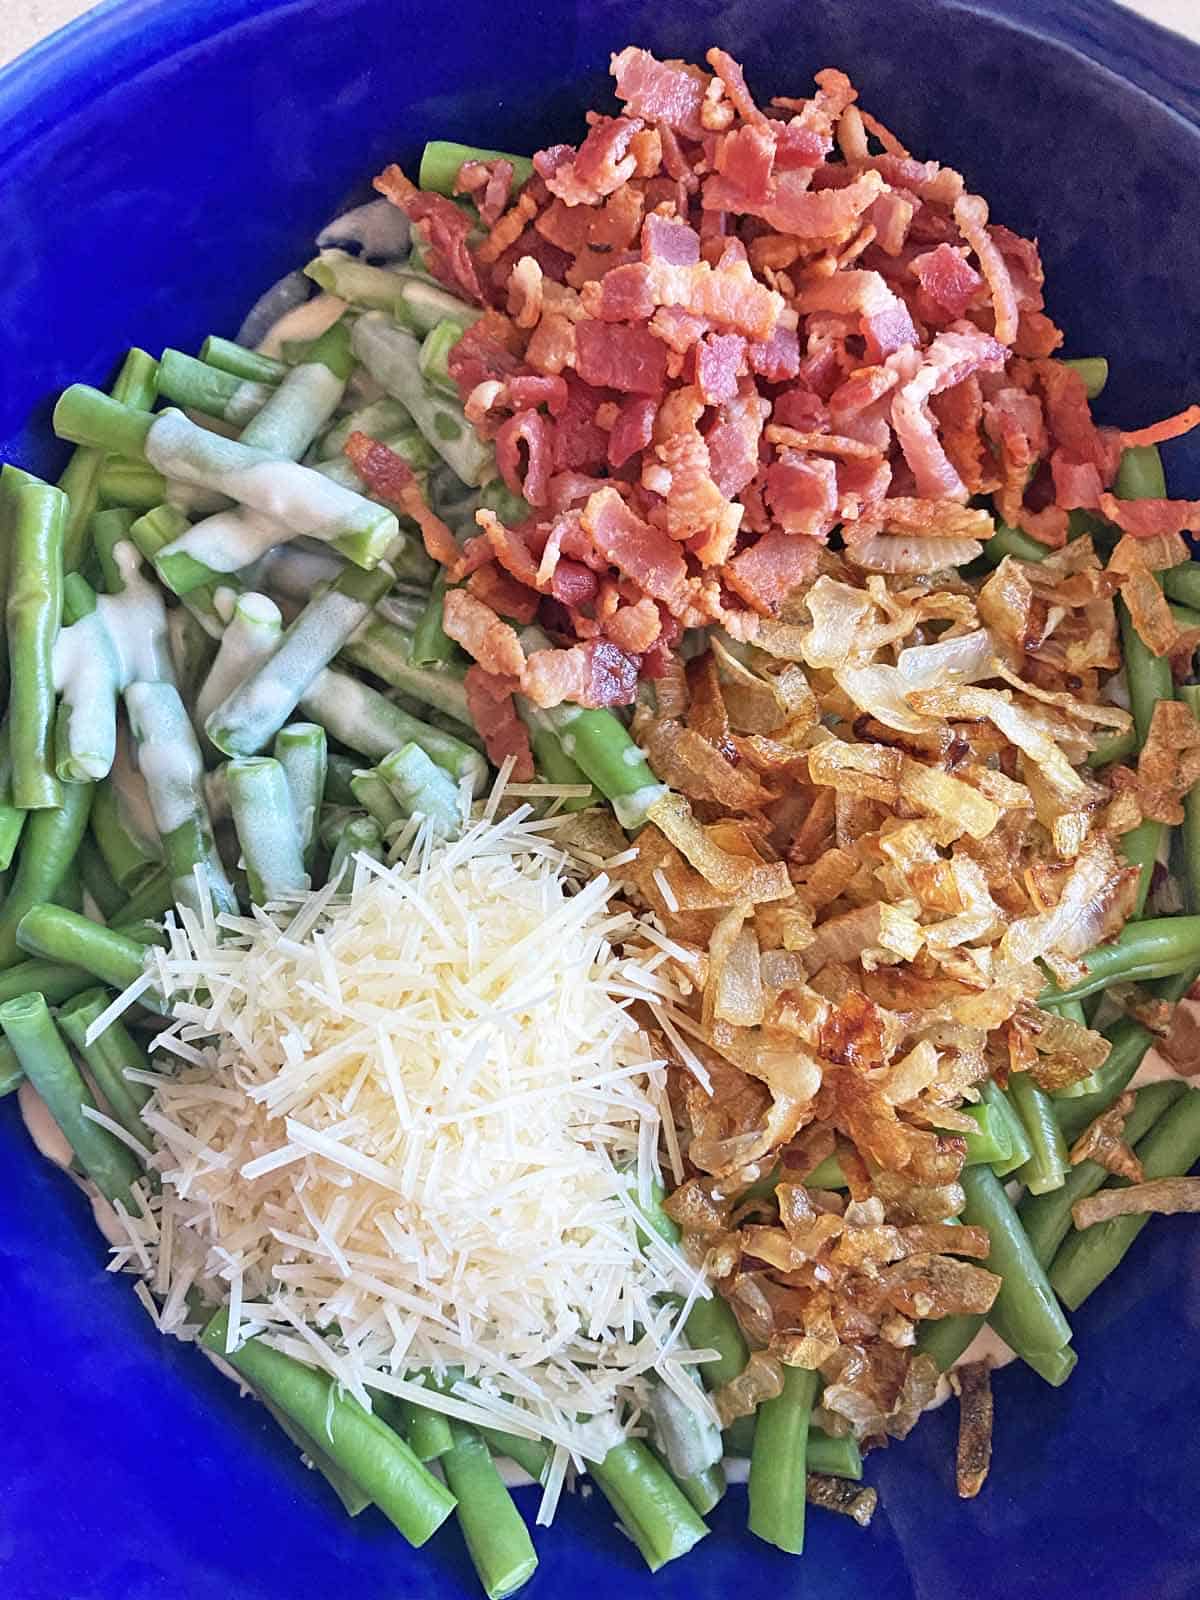 The cooked ingredients to make bacon green bean casserole in a blue bowl.